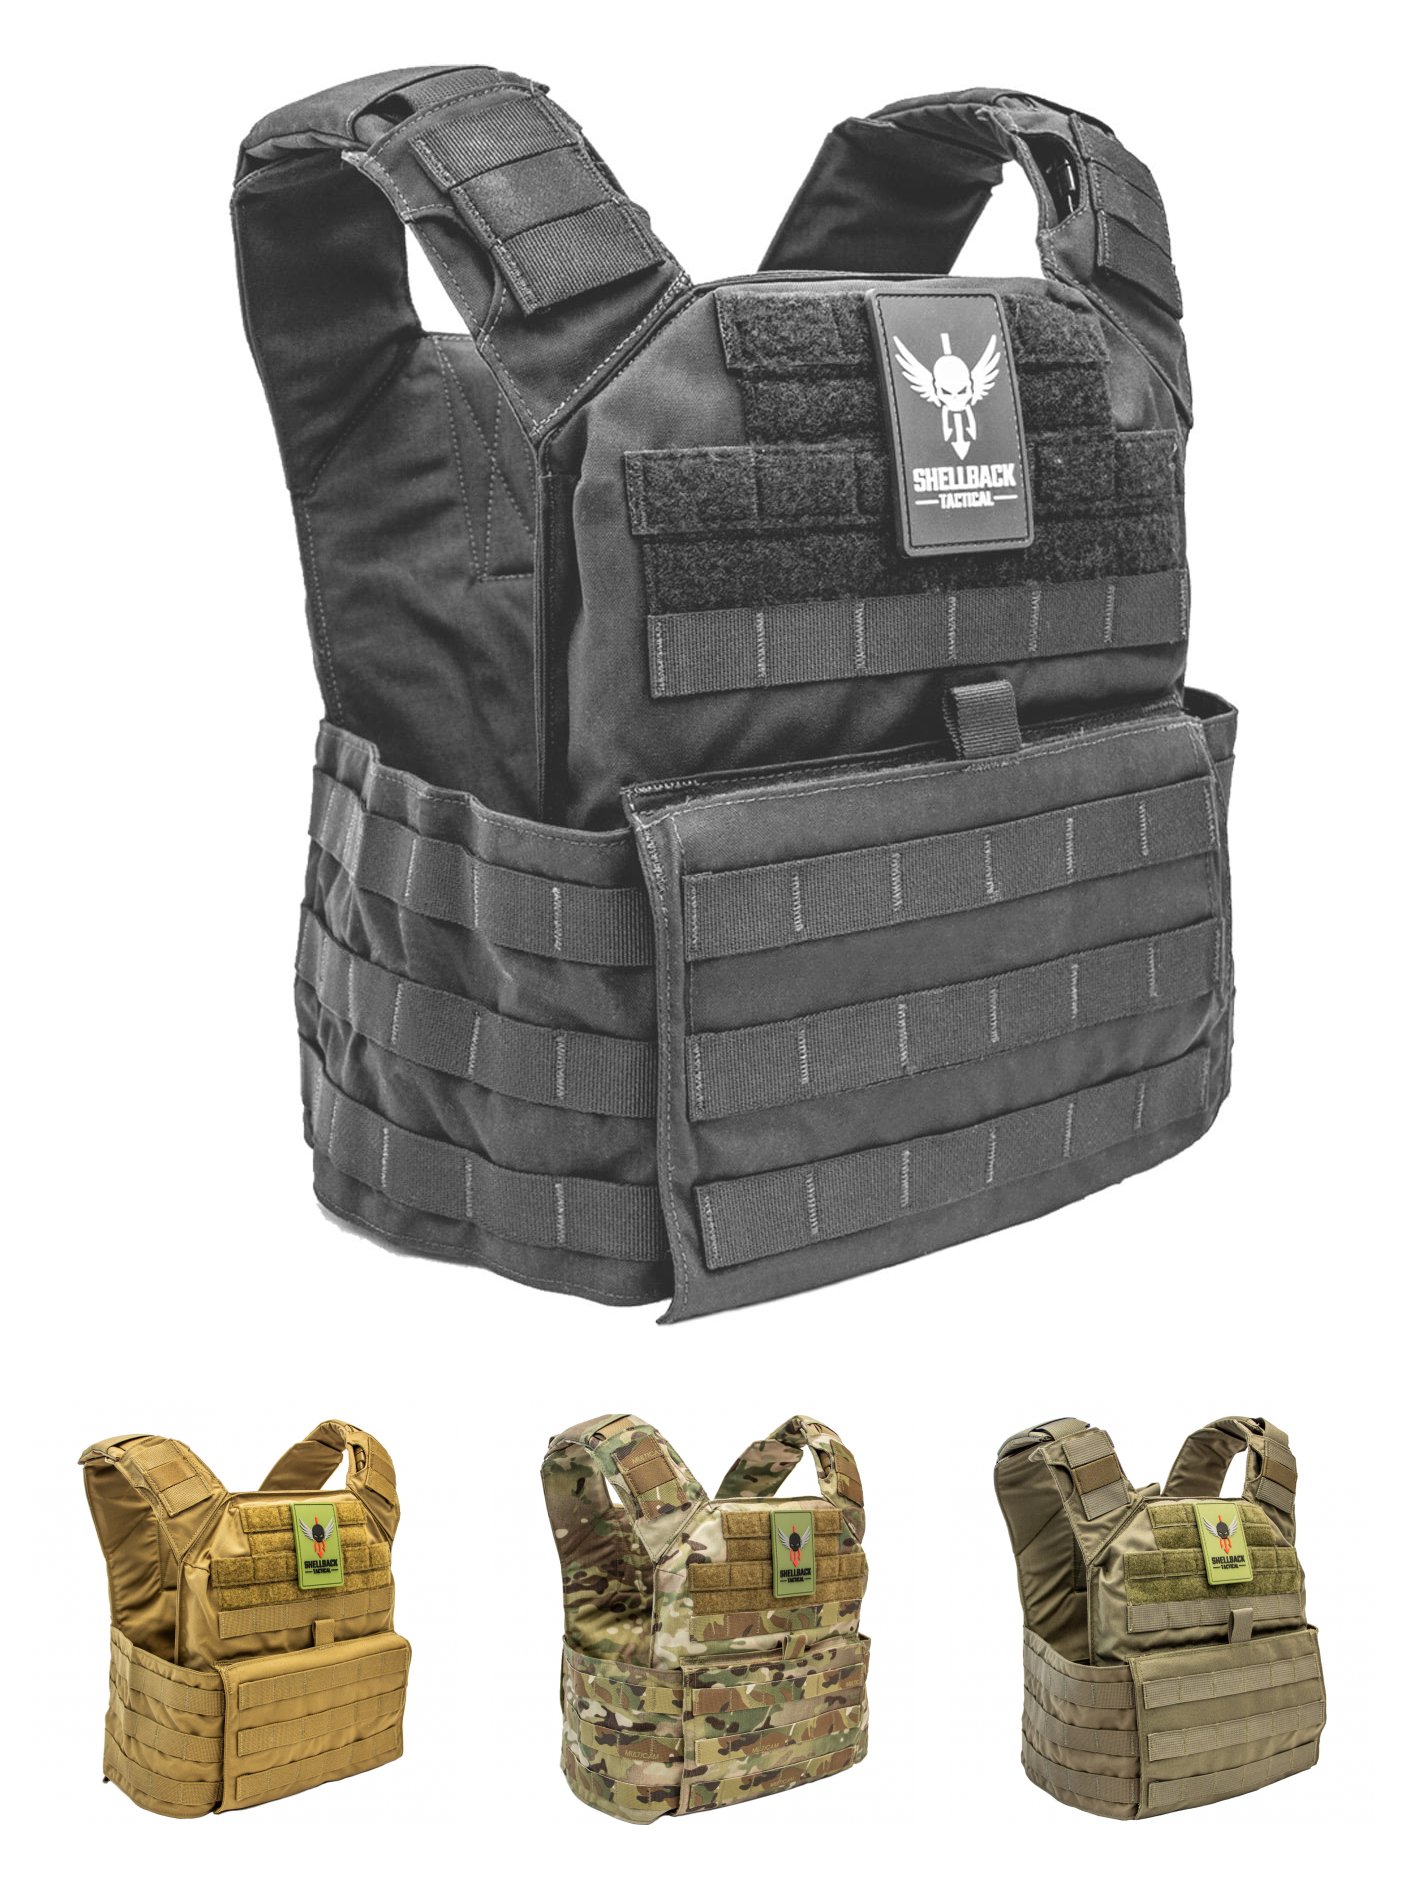 Shellback Tactical Banshee Rifle Plate Carrier | Up to 26% Off 4.6 